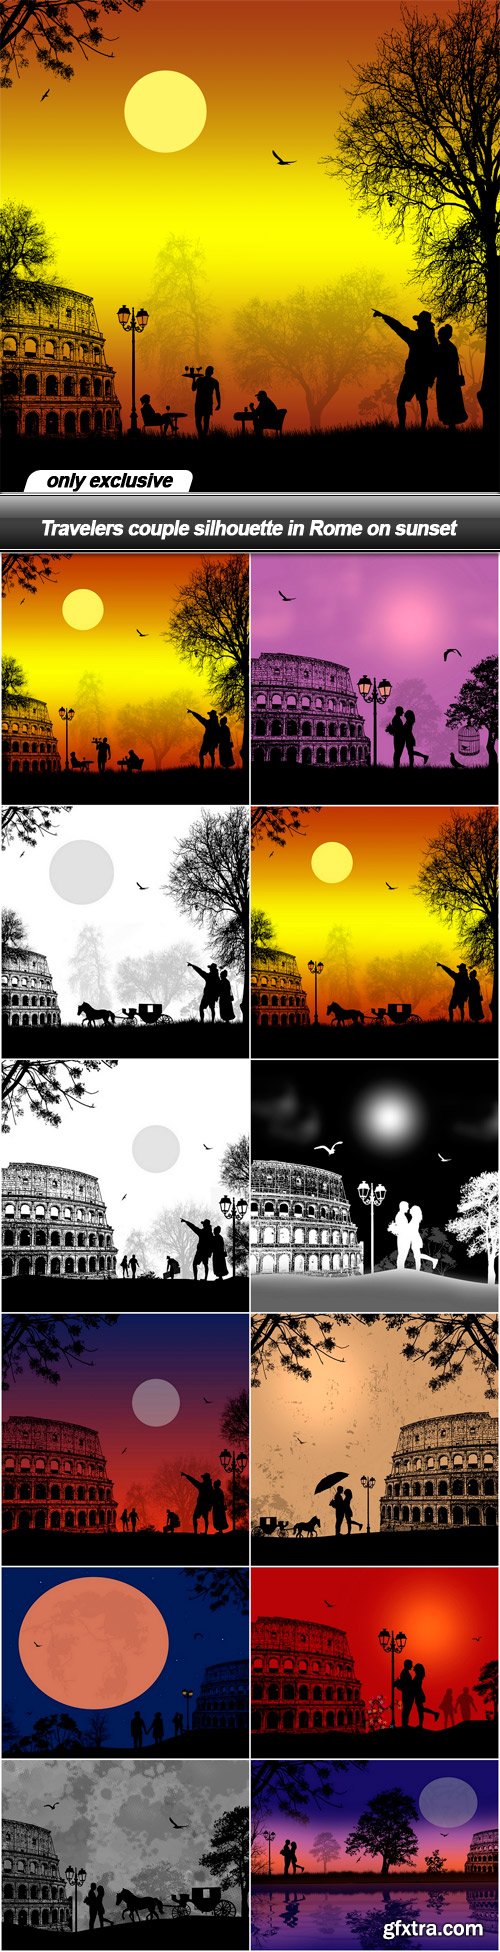 Travelers couple silhouette in Rome on sunset - 12 EPS